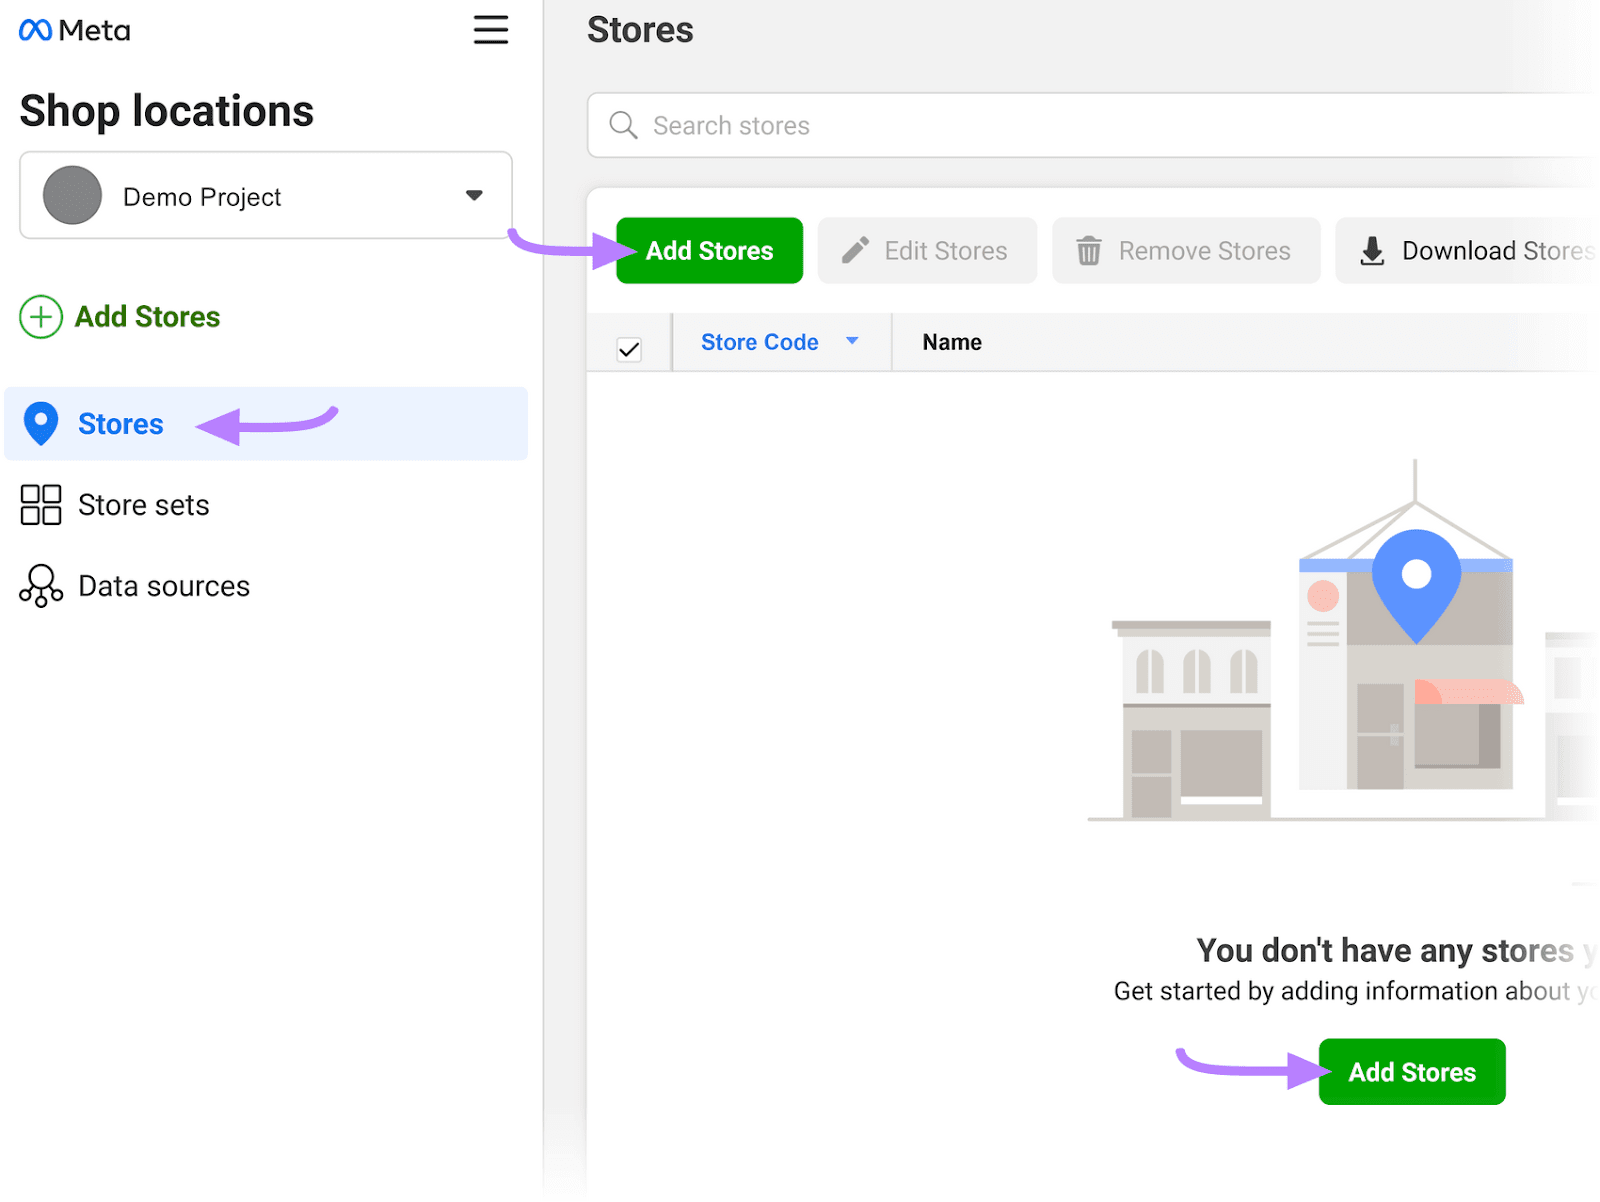 “Add Stores" green button highlighted under the "Stores" window